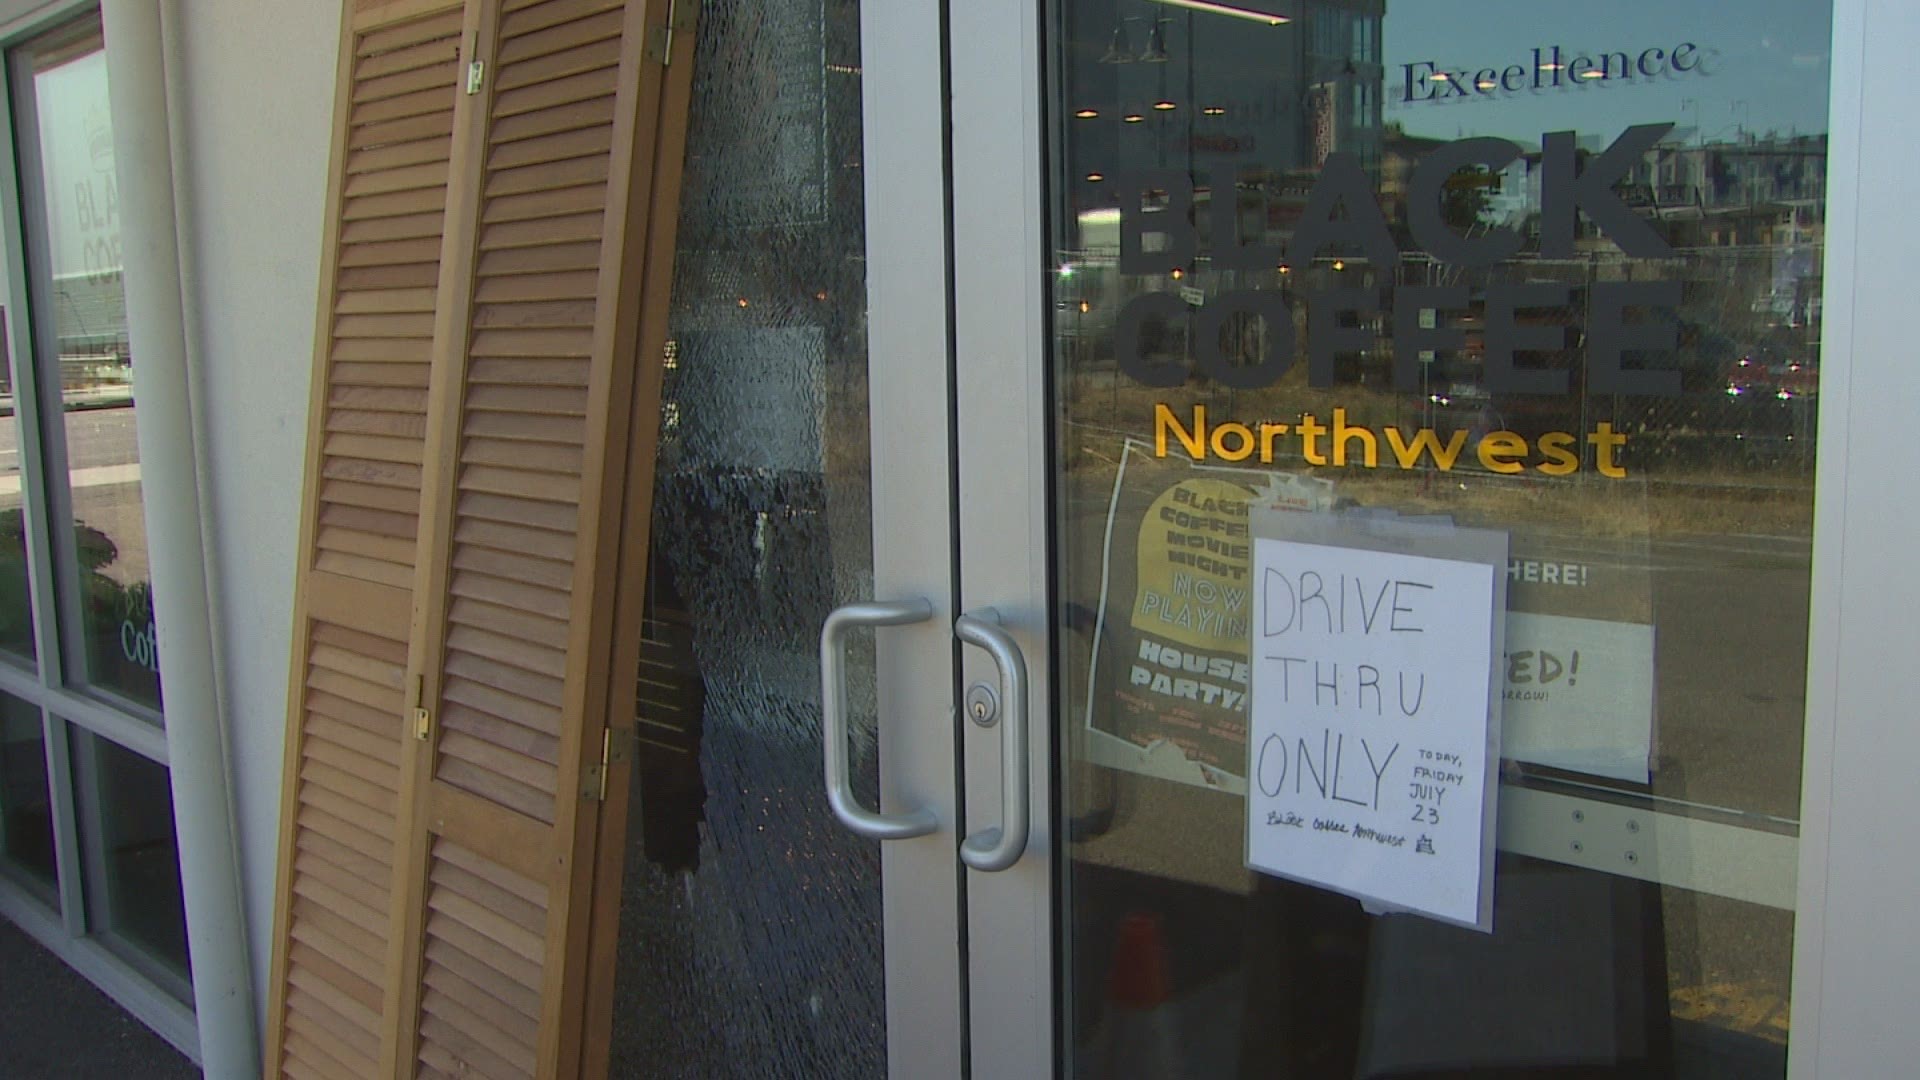 Black Coffee Northwest has been hit three times in nine months. Previously vandals threw Molotov cocktails at the building and drew racist images on the walls.